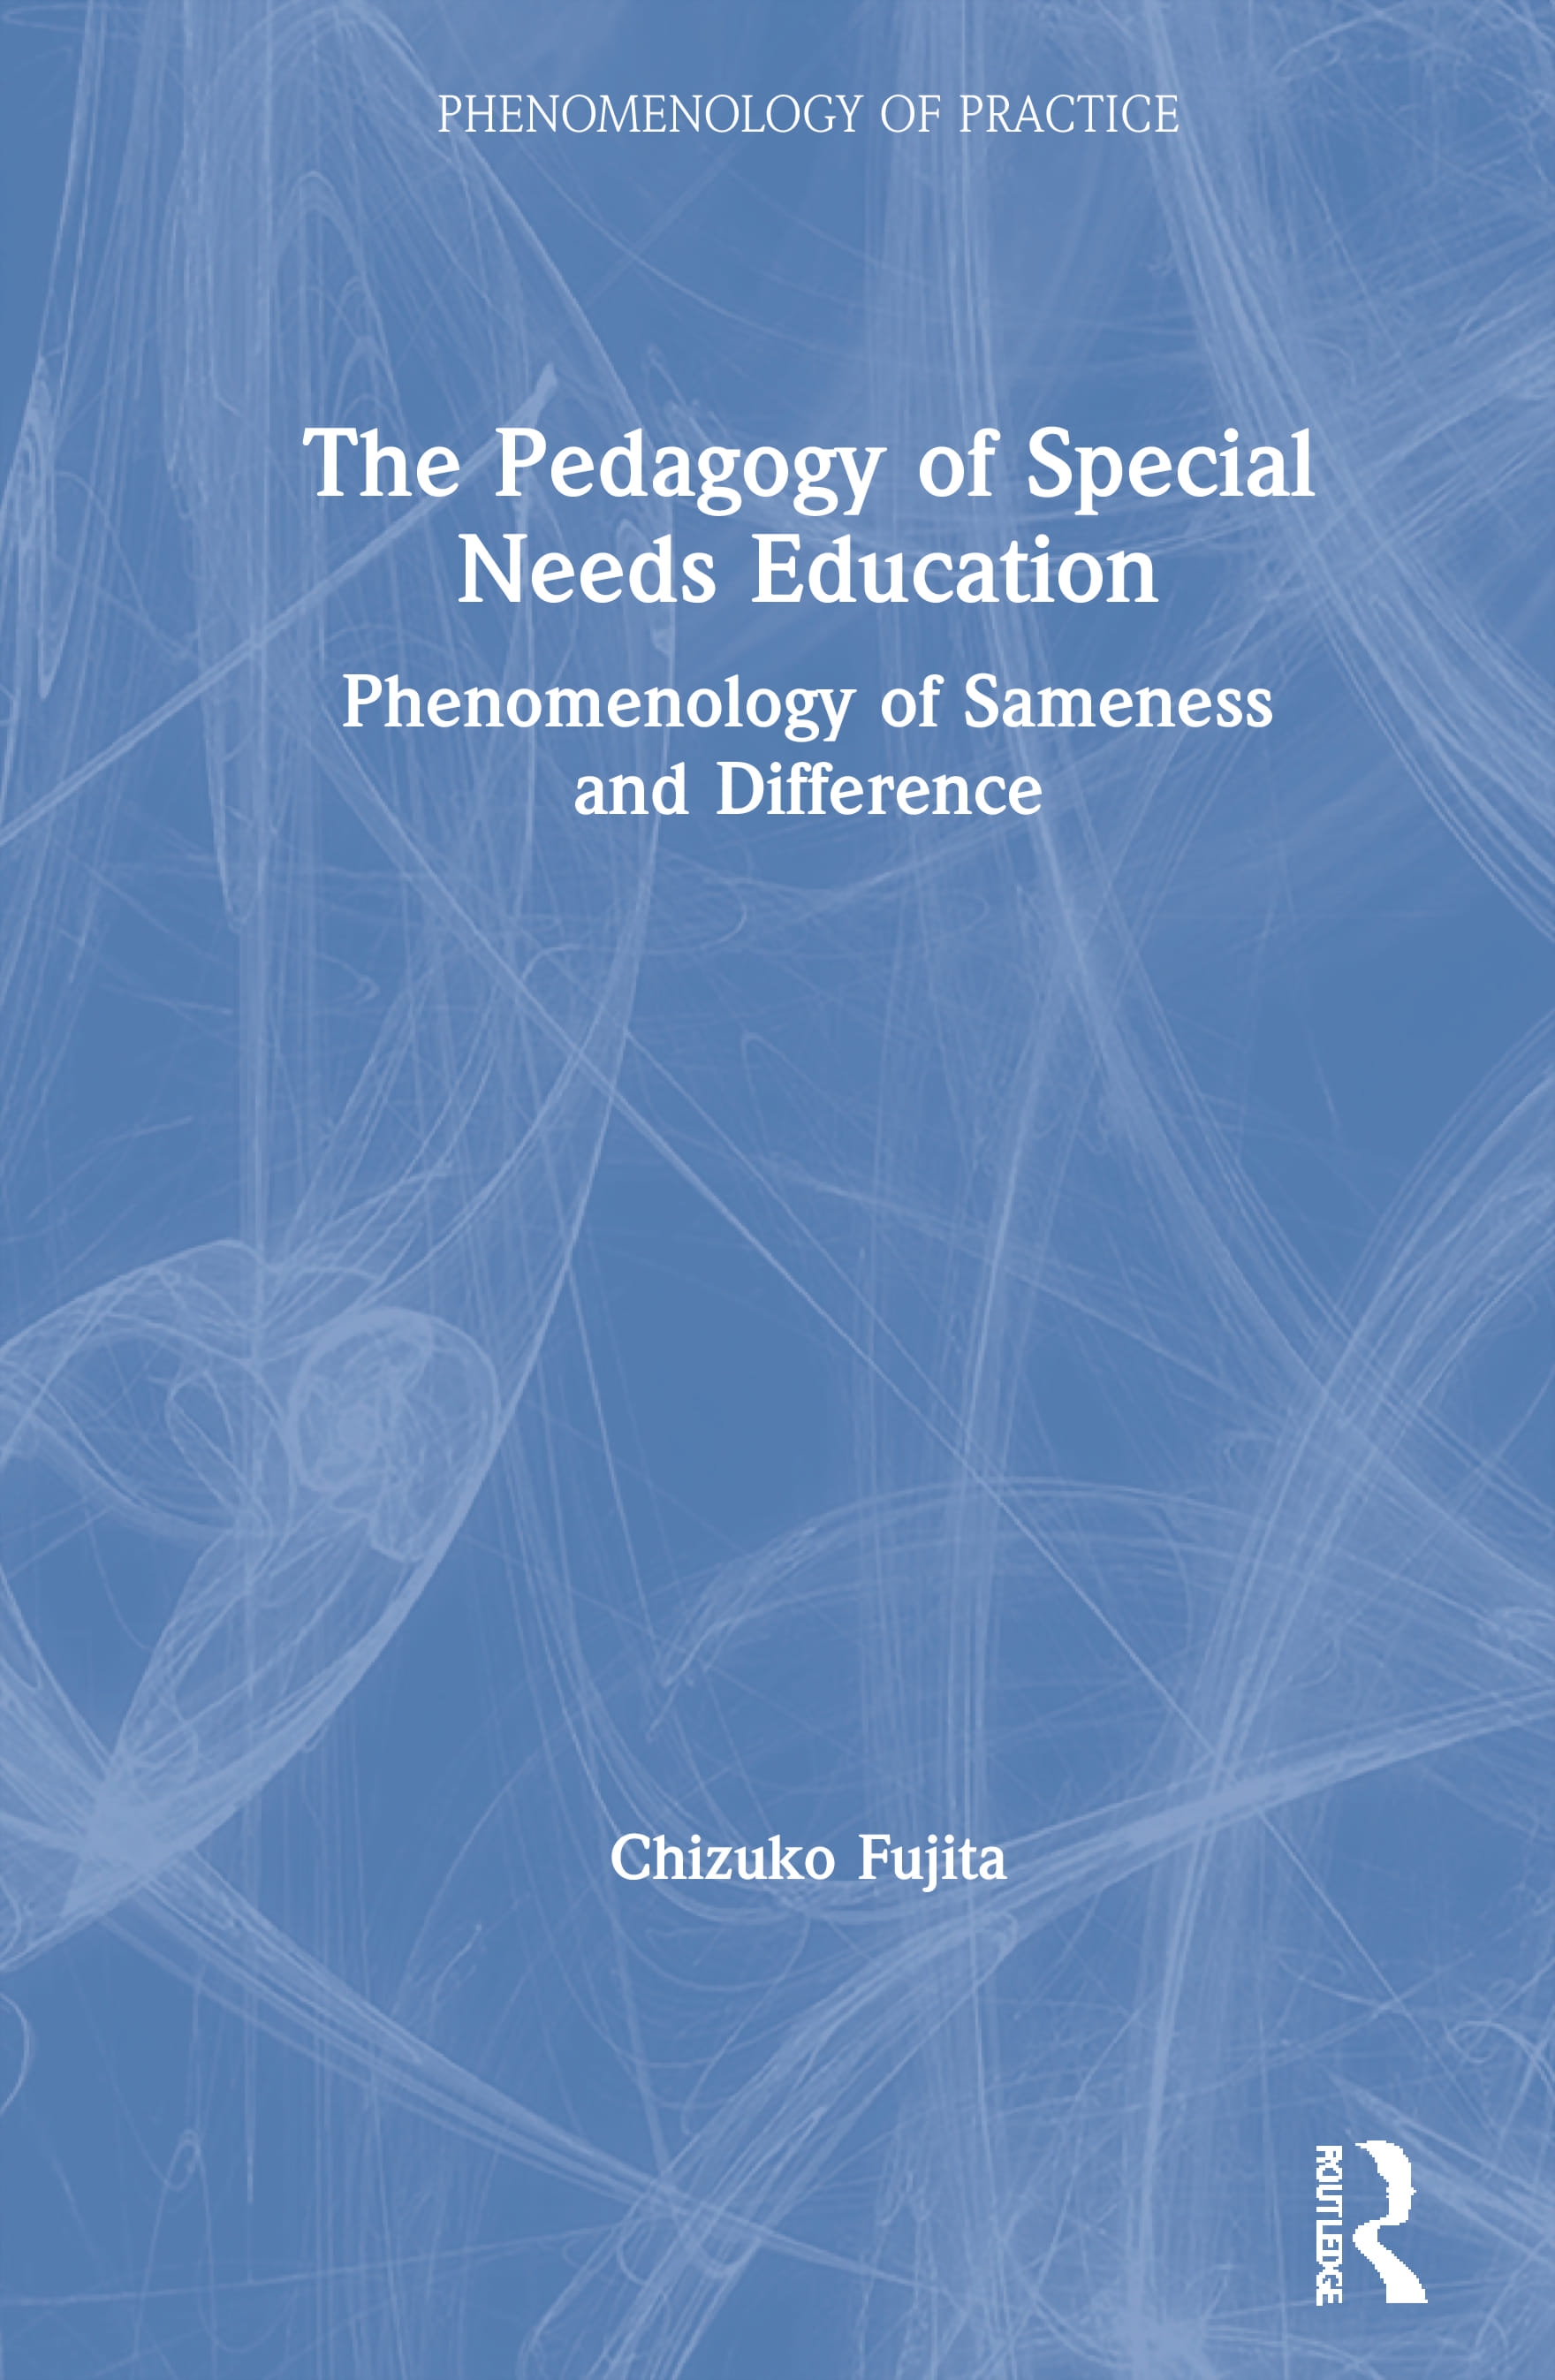 The Pedagogy of Special Needs Education: Phenomenology of Sameness and Difference